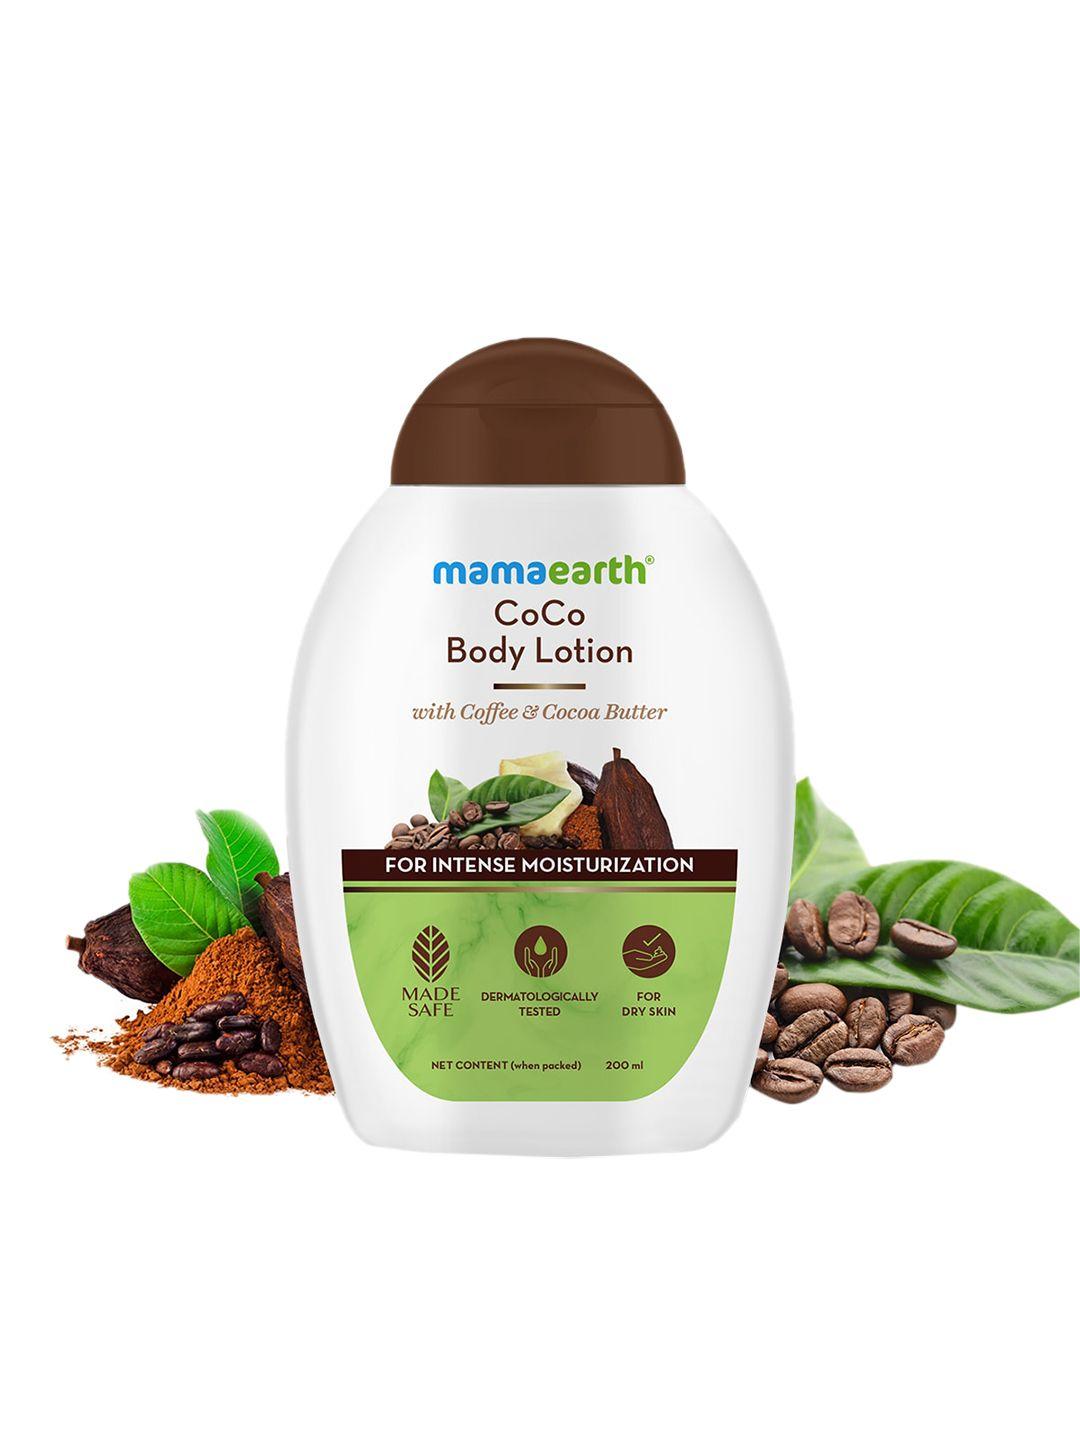 mamaearth coco body lotion with coffee & cocoa butter - 200 ml